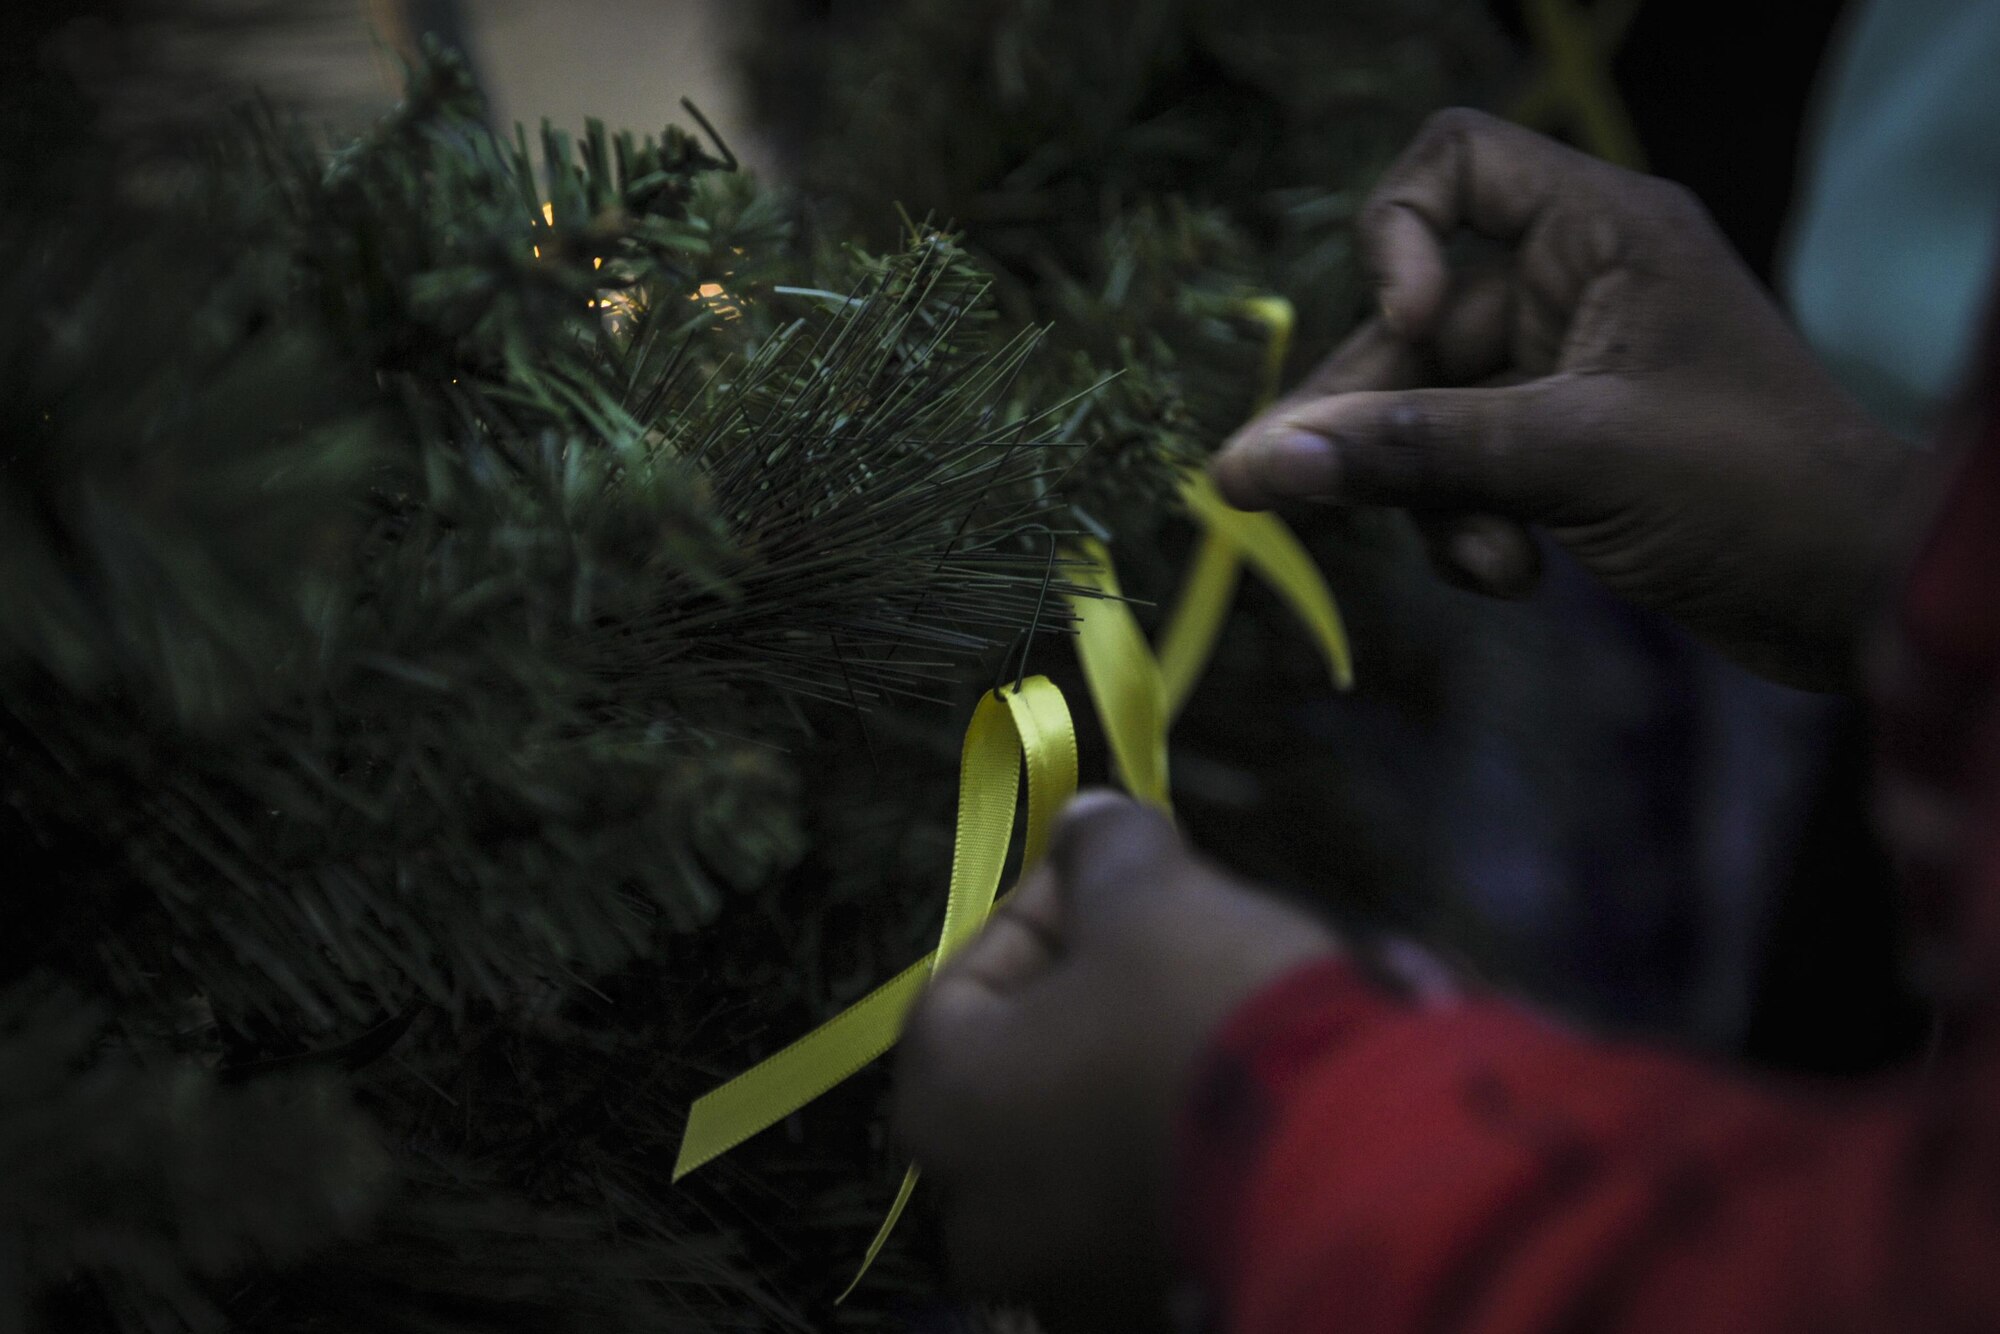 Family members pin yellow ribbons on a wreath during the Christmas tree lighting ceremony at Hurlburt Field, Fla., Dec. 2, 2016. The yellow ribbon is pinned to honor and remember those who are deployed during the holiday season. (U.S. Air Force photo by Airman Dennis Spain)